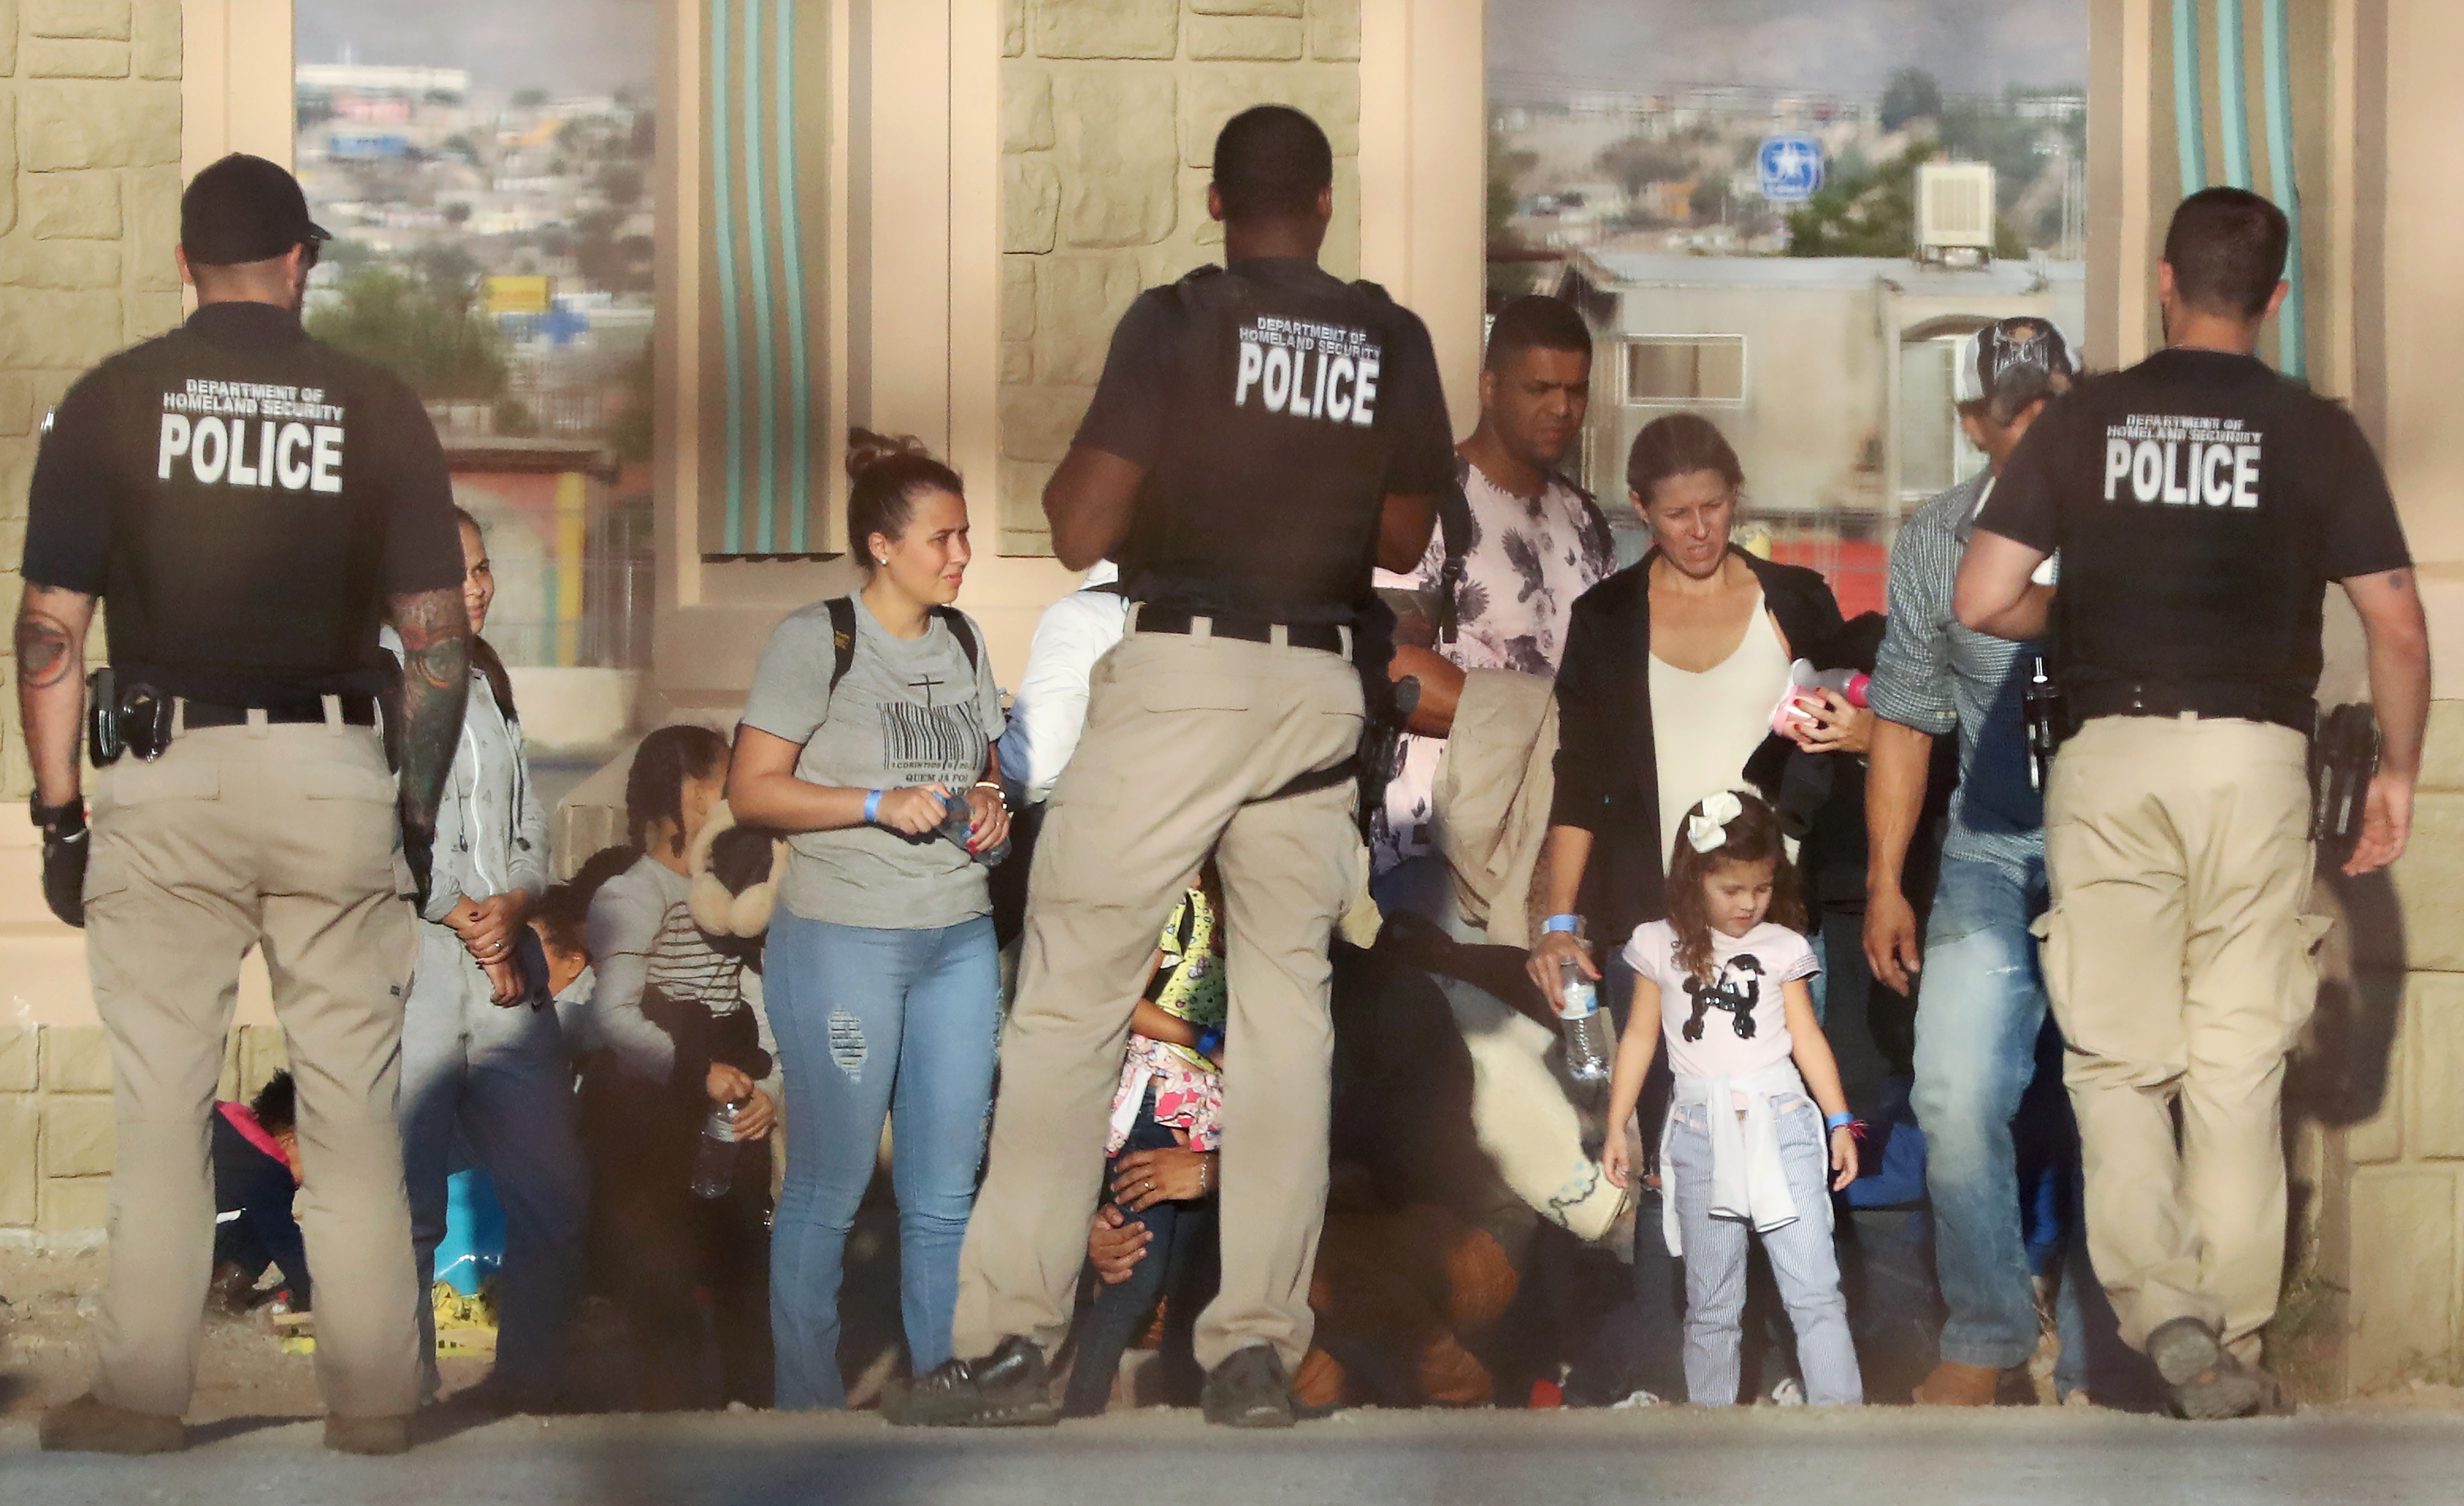 DHS Police Officers Detain Migrants At El Paso, Texas (Photo by Mario Tama/Getty Images)